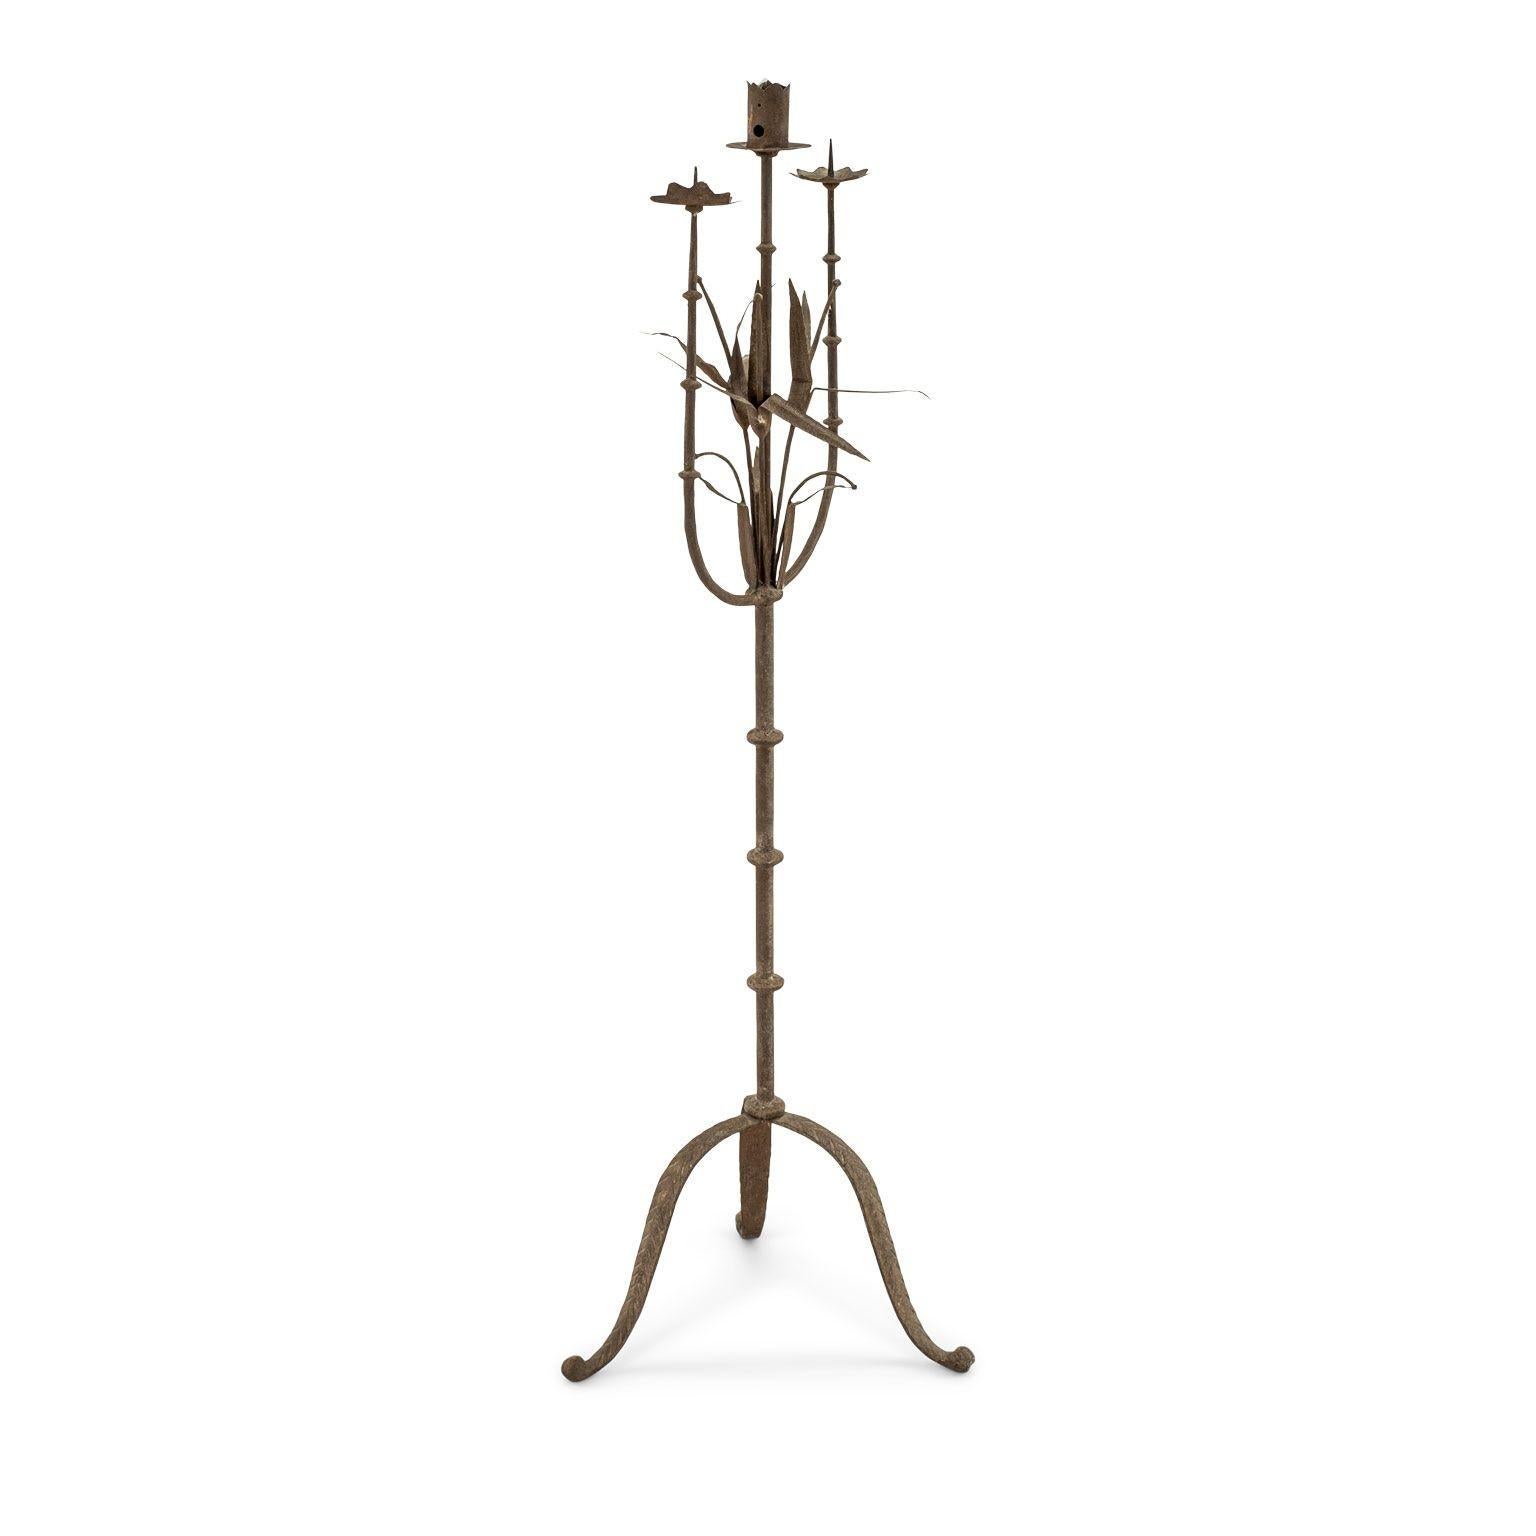 Italian forged iron candelabra dating to the 19th century. Adorned in hammer iron lily motif. Acanthus three-legged base. Nice weathered patina.